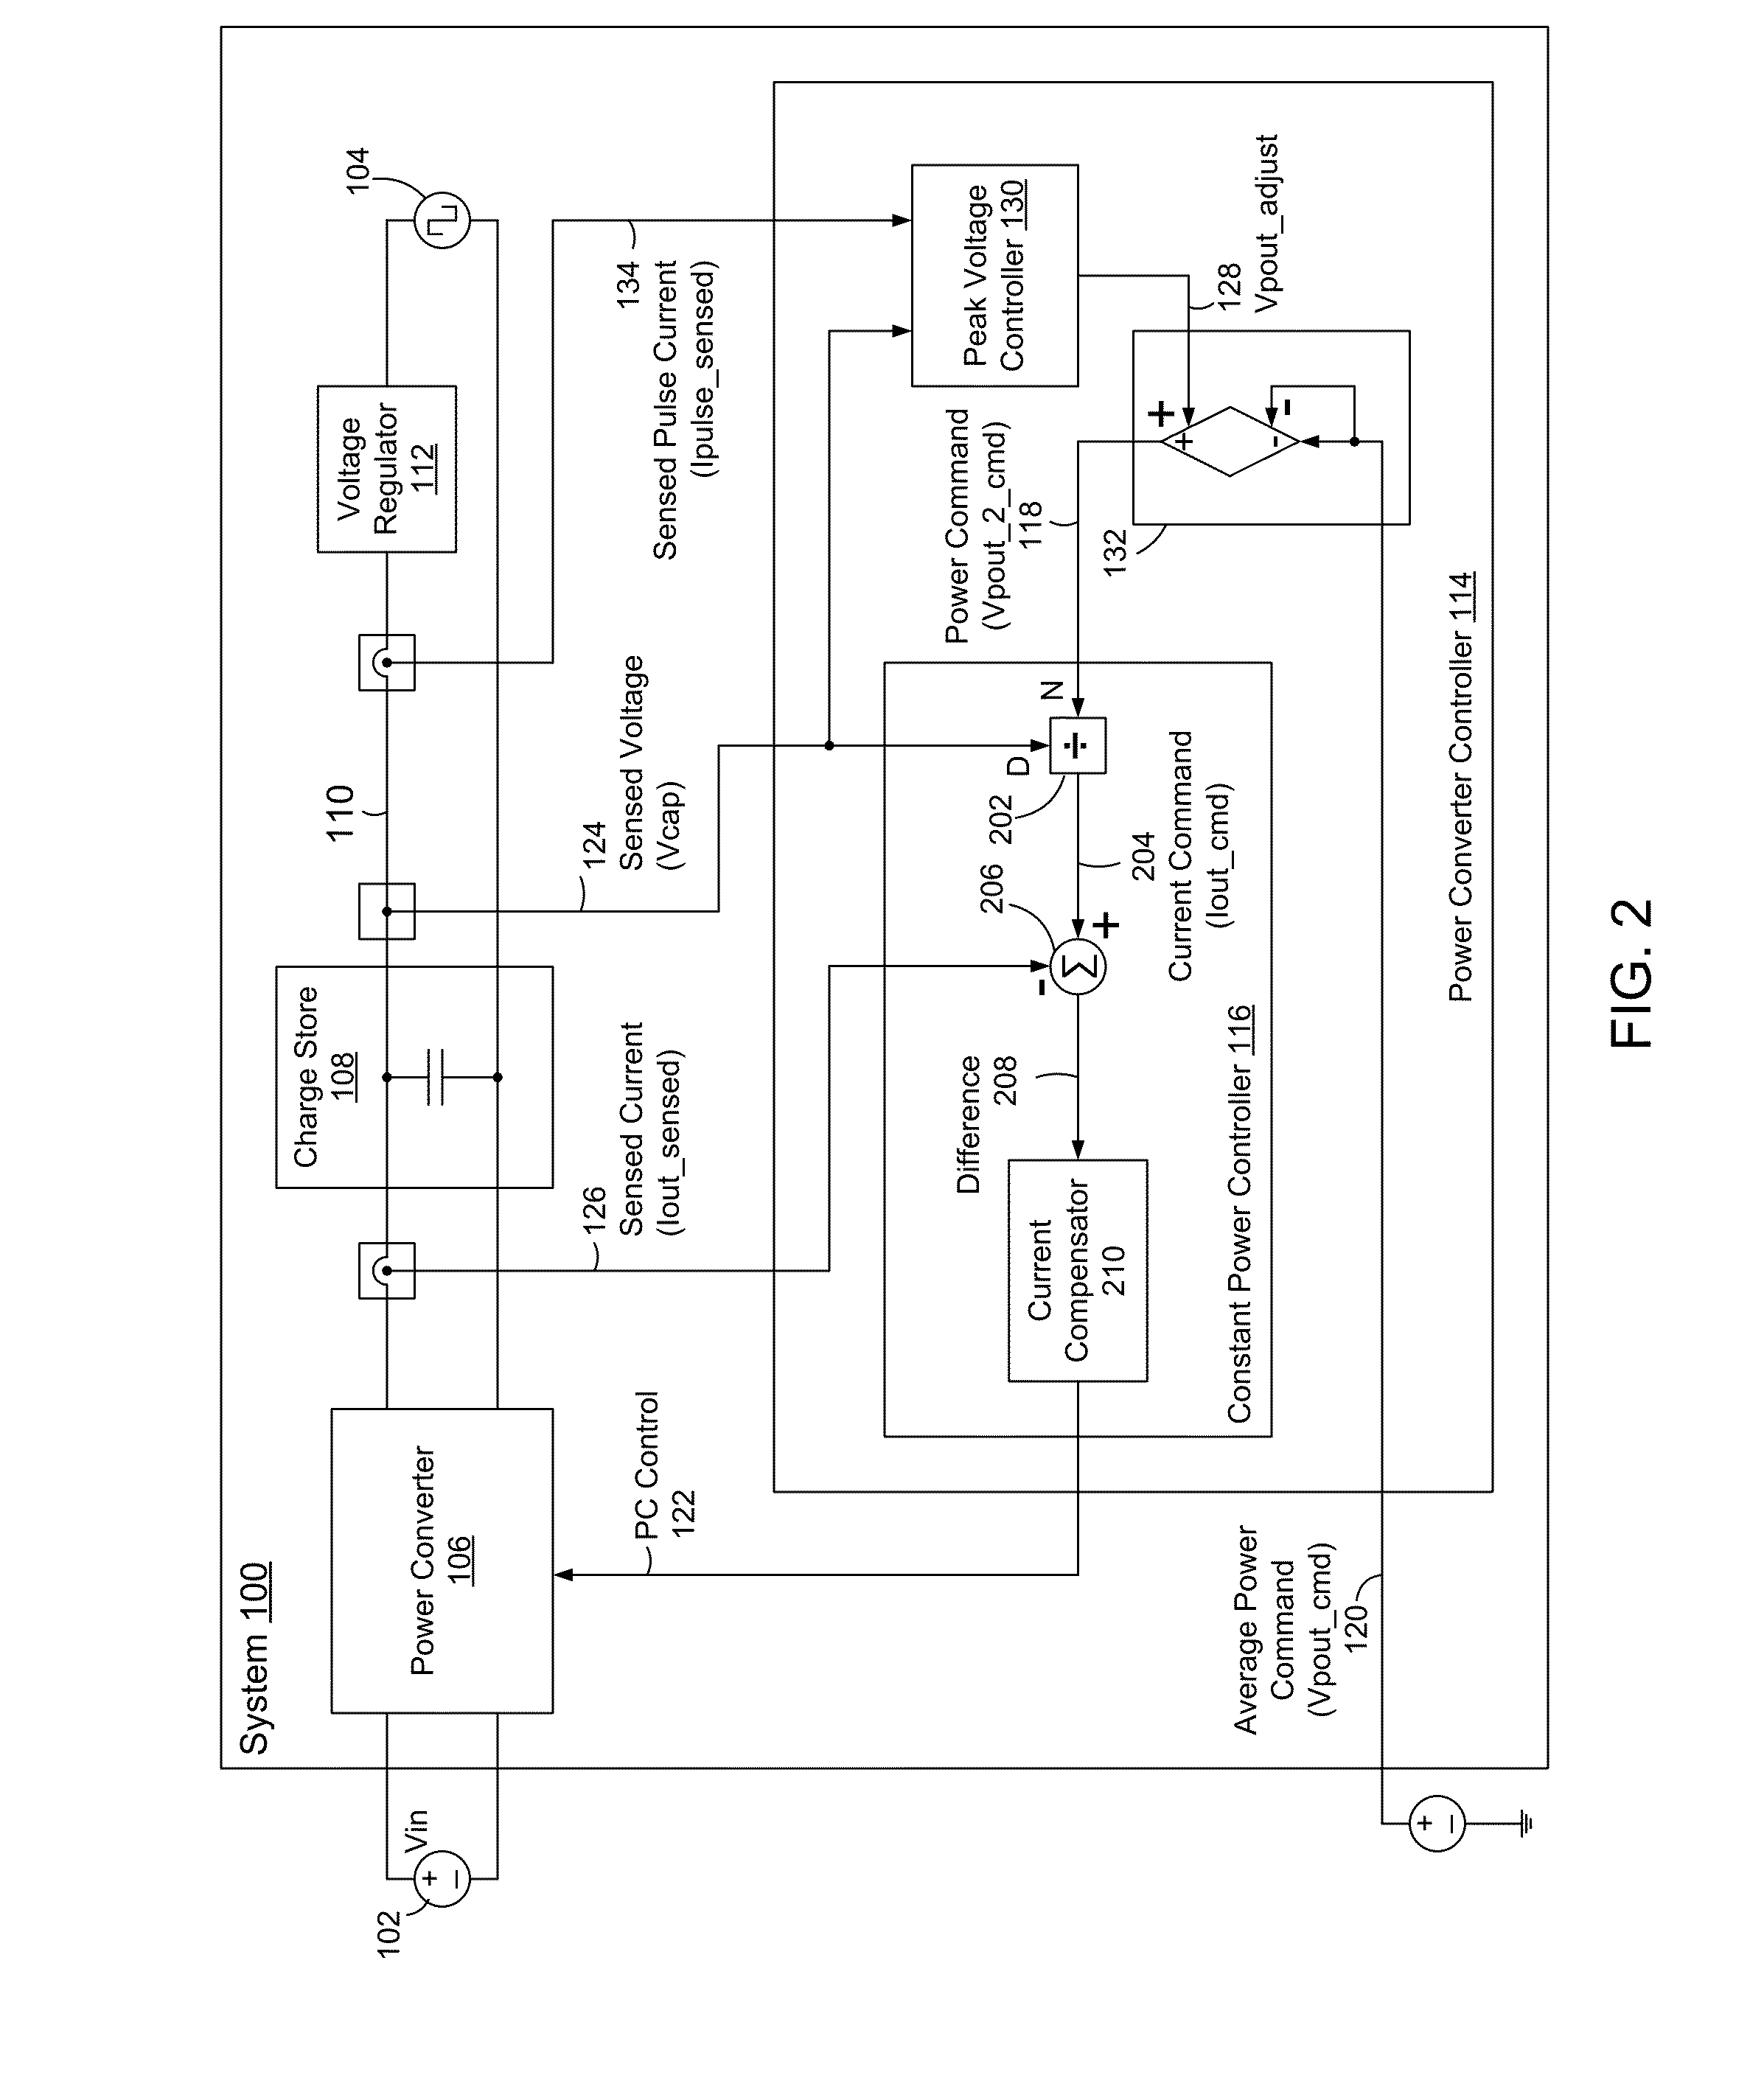 Methods and Systems to Convert a Pulse Power Demand to a Constant Power Draw